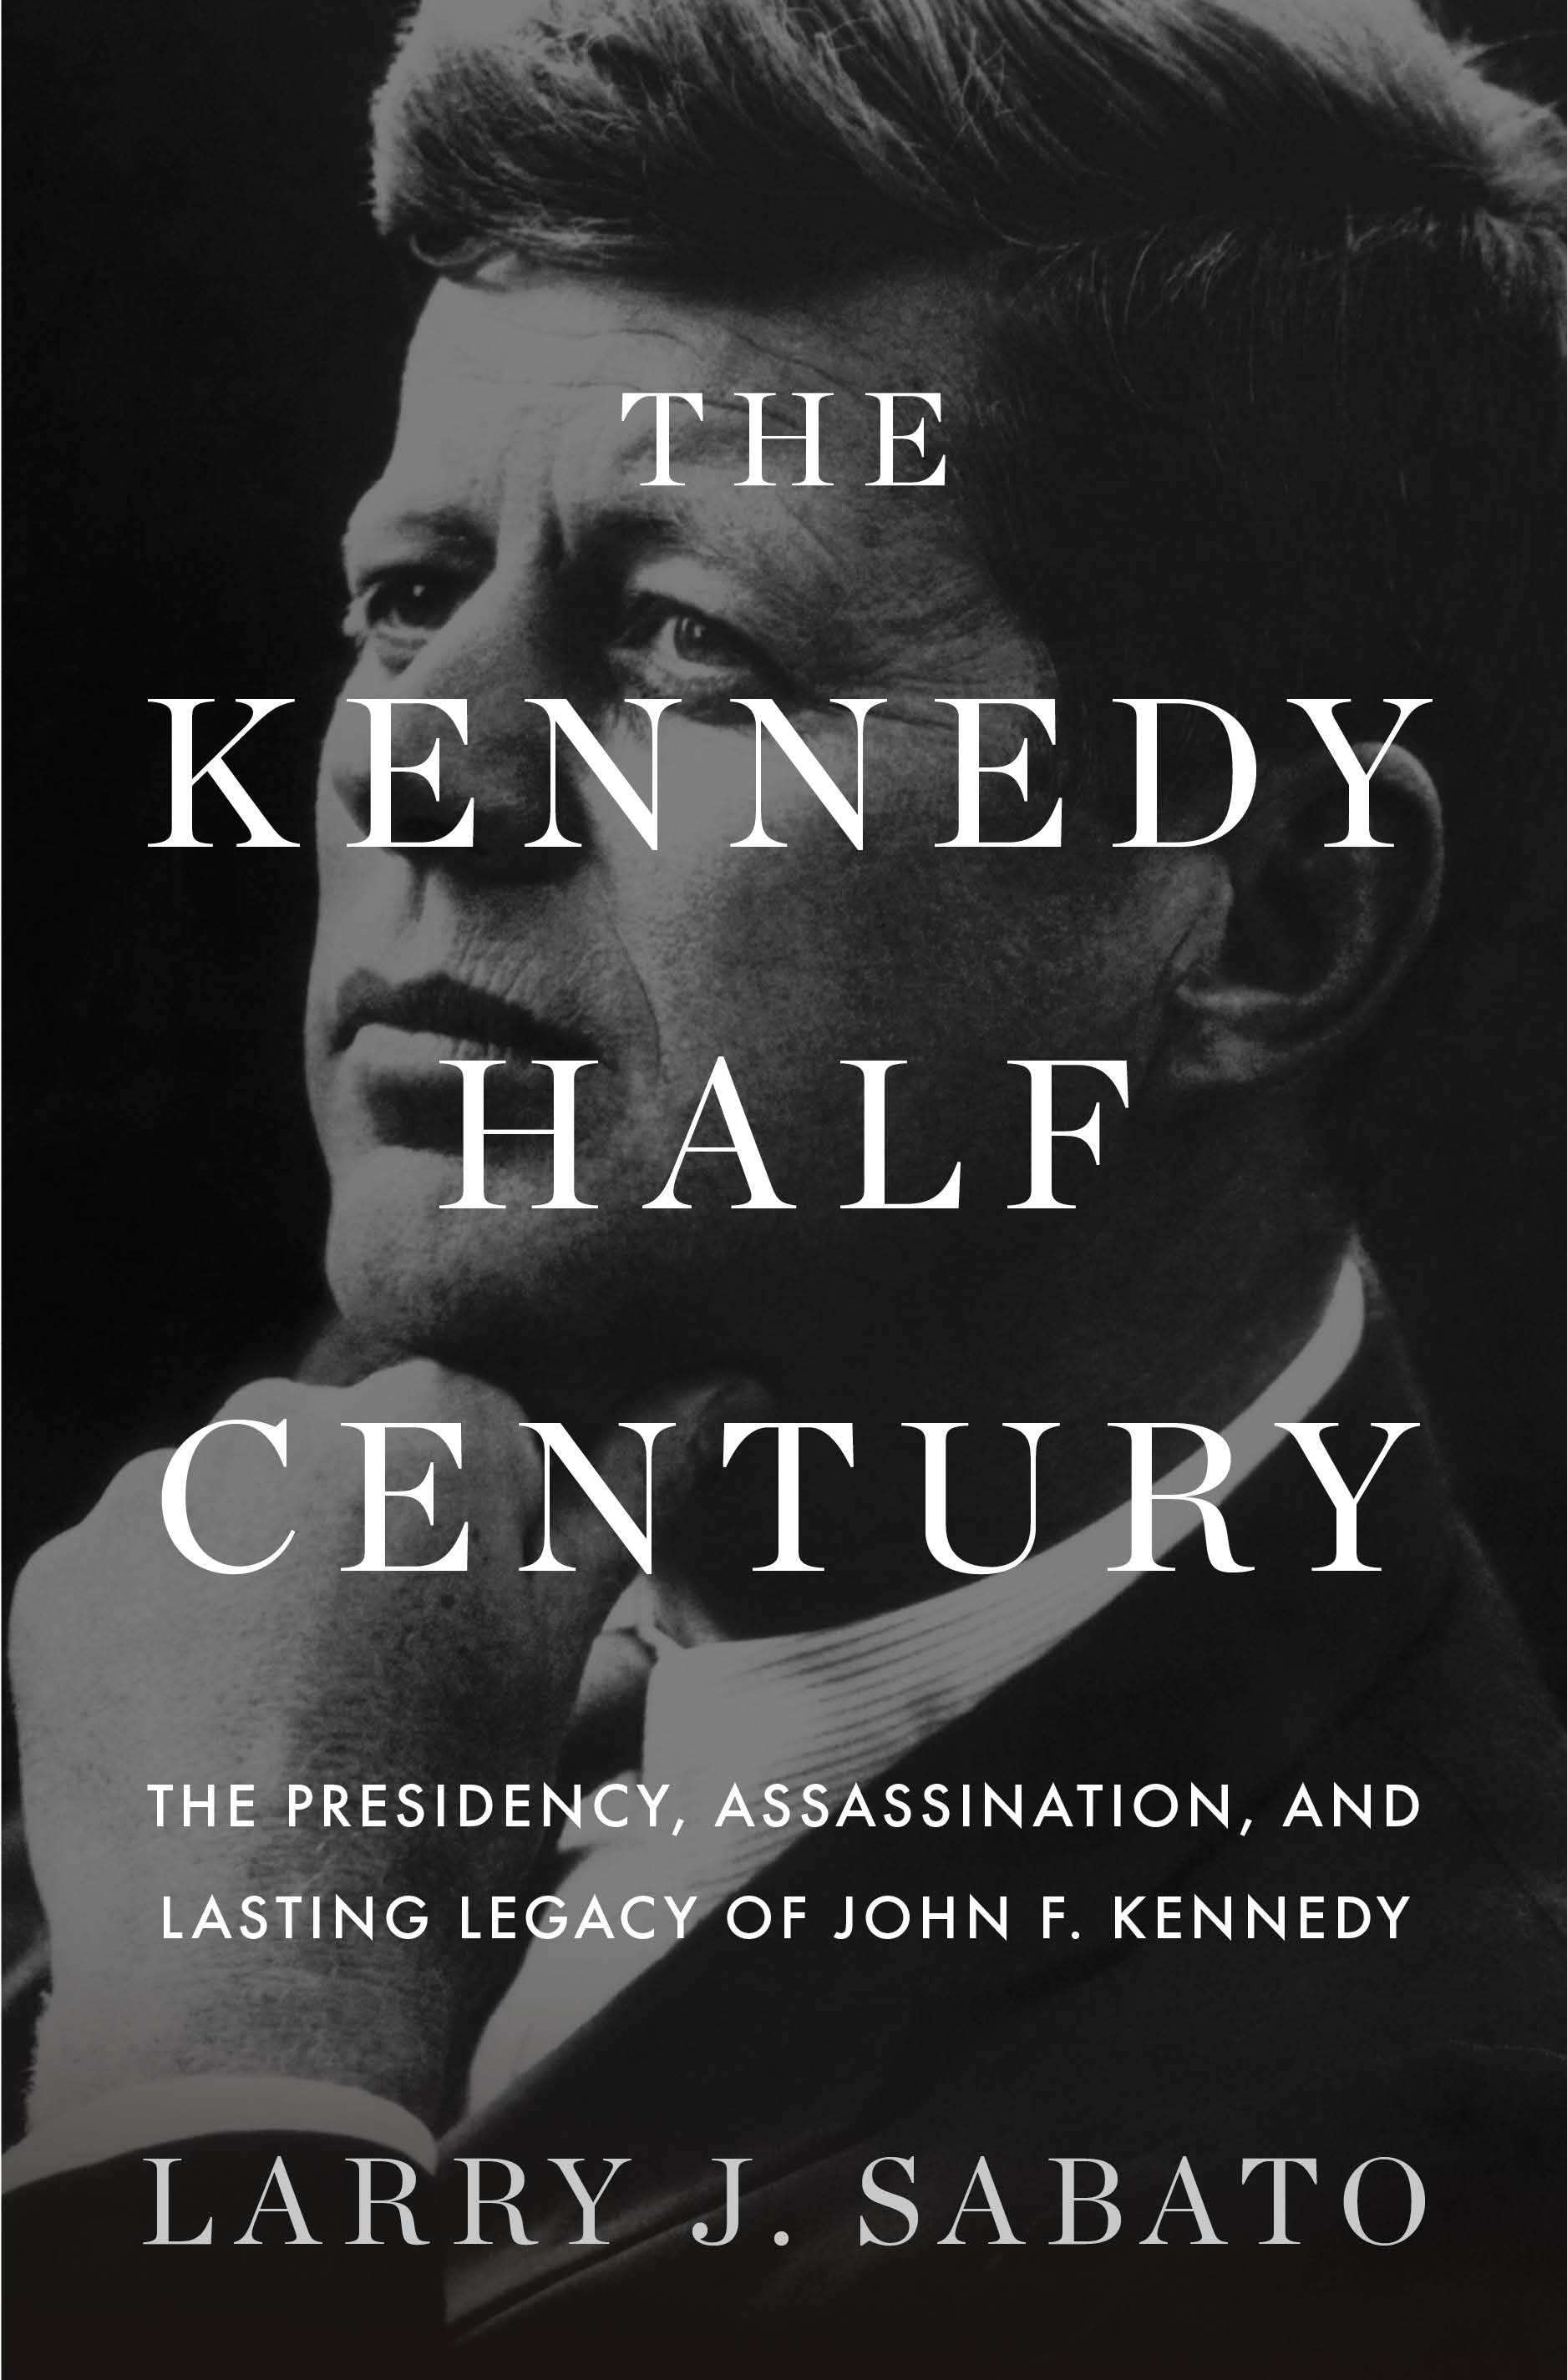 Book cover reads: The Kennedy Half Century.  The presidency, assassination, and lasting legacy of John F. Kennedy. Larry J. Sabato